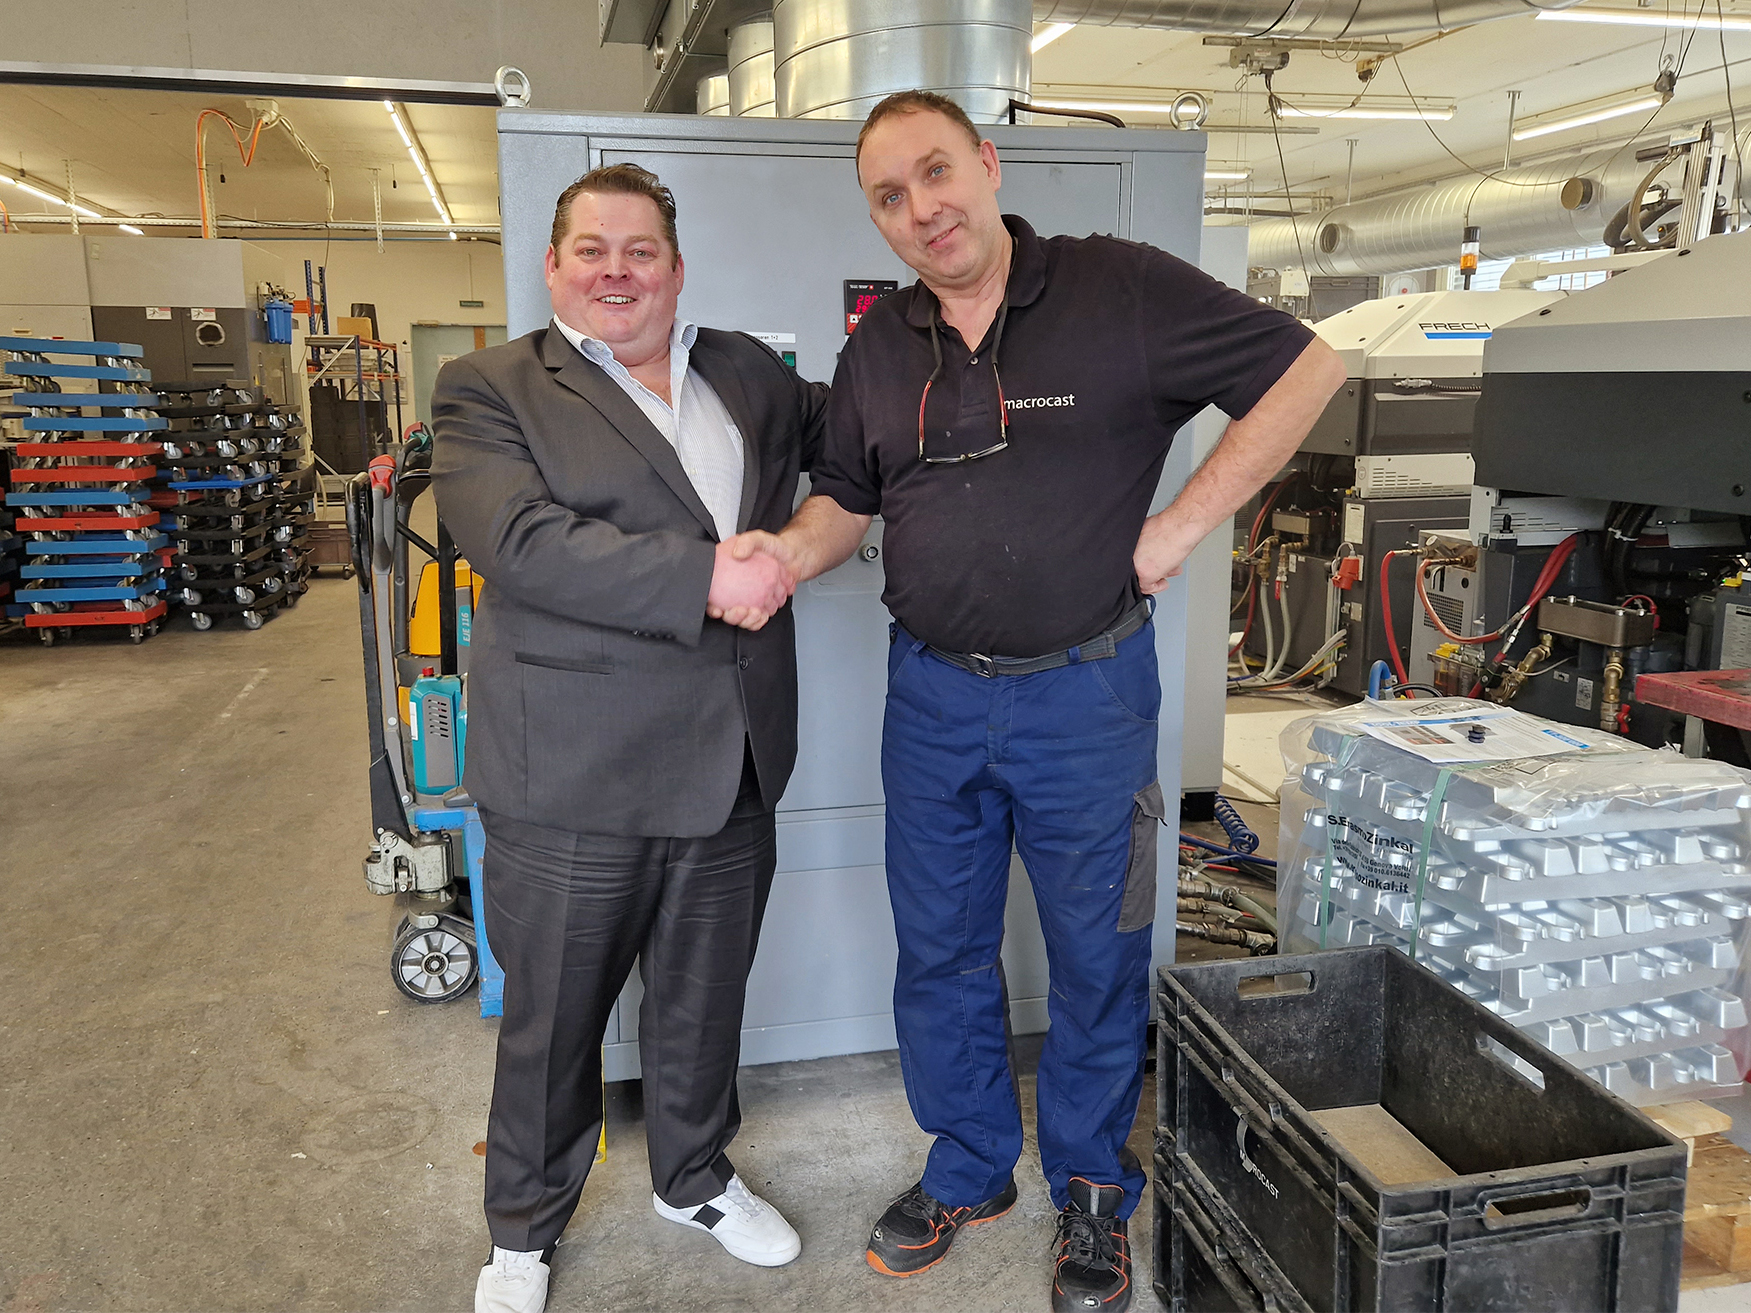 Dominic Roth, Area Sales Manager Switzerland of Tool-Temp AG and Jens Paul, Technical Manager of the die casting foundry Macrocast GmbH